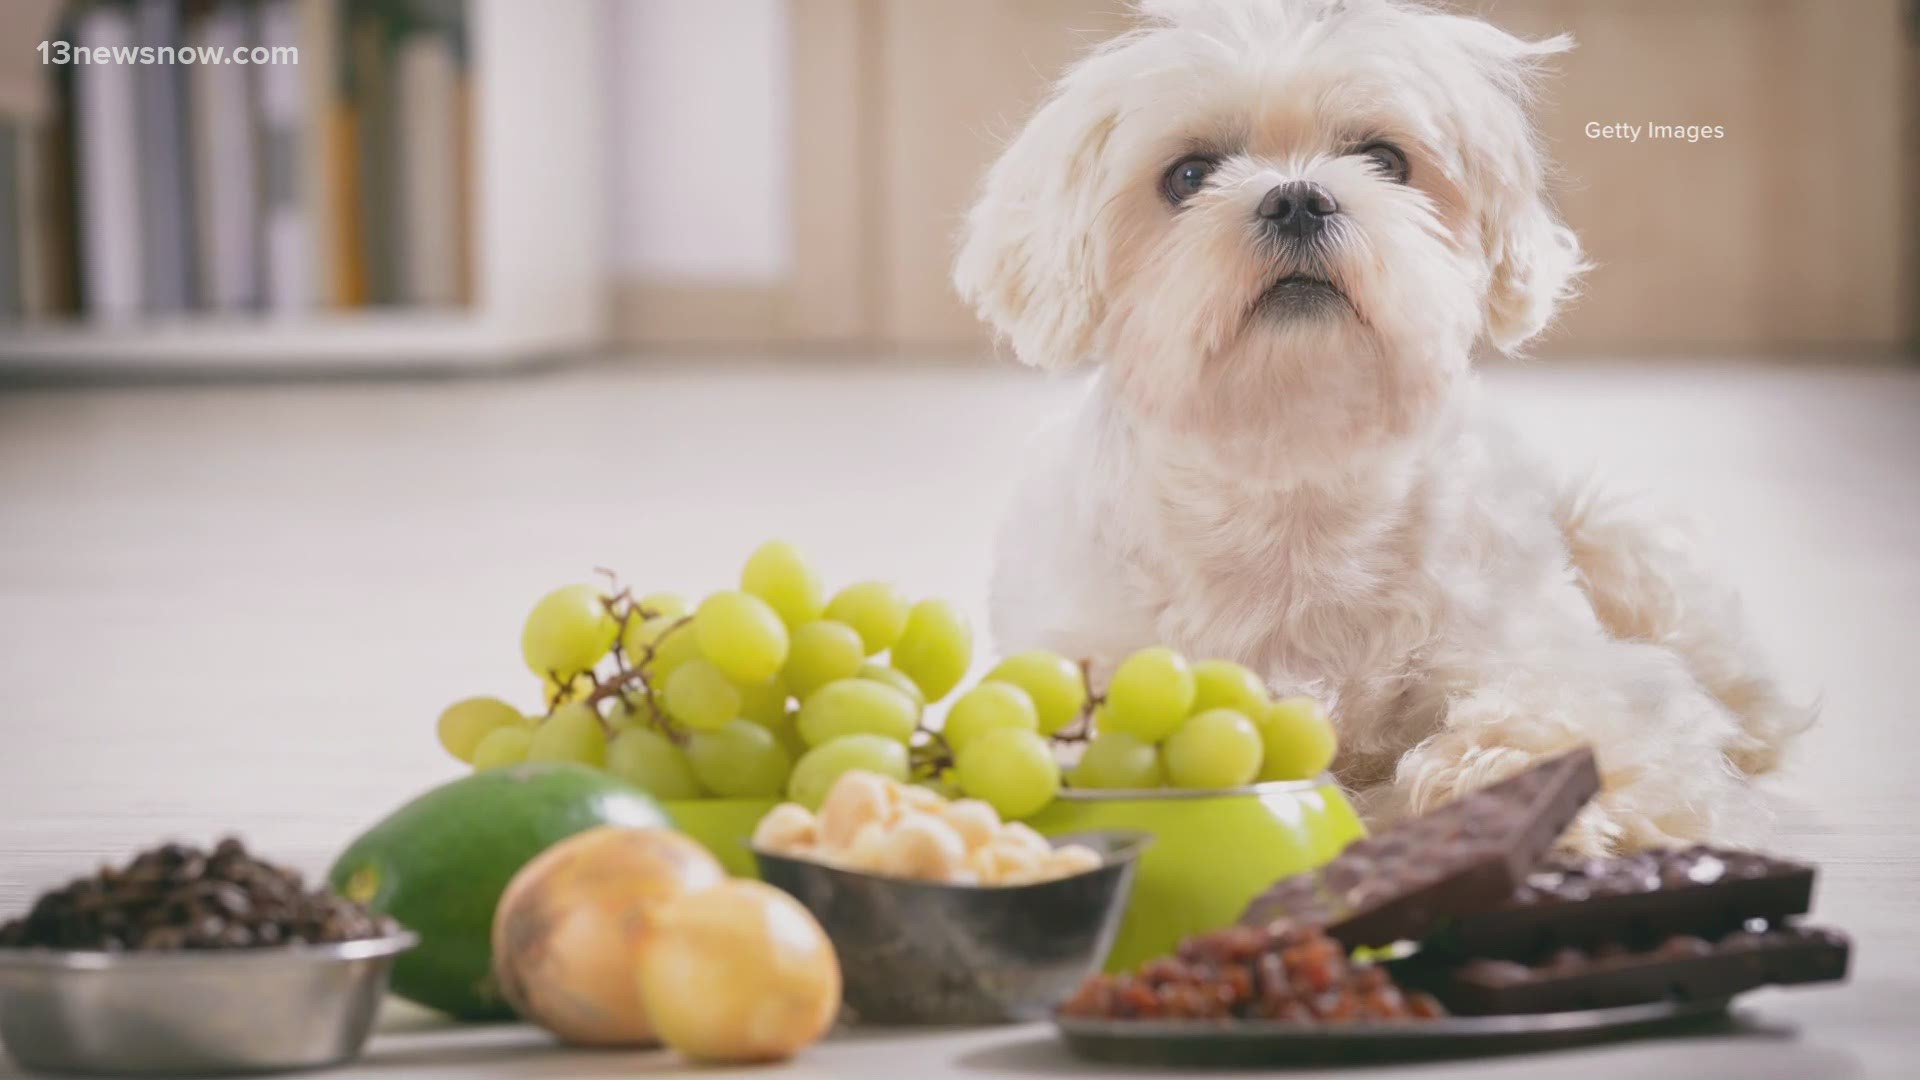 Most people know not to give dogs chocolate; but there are some other dangerous foods on the list, like sugar-free gum, grapes, raisins and alcohol.